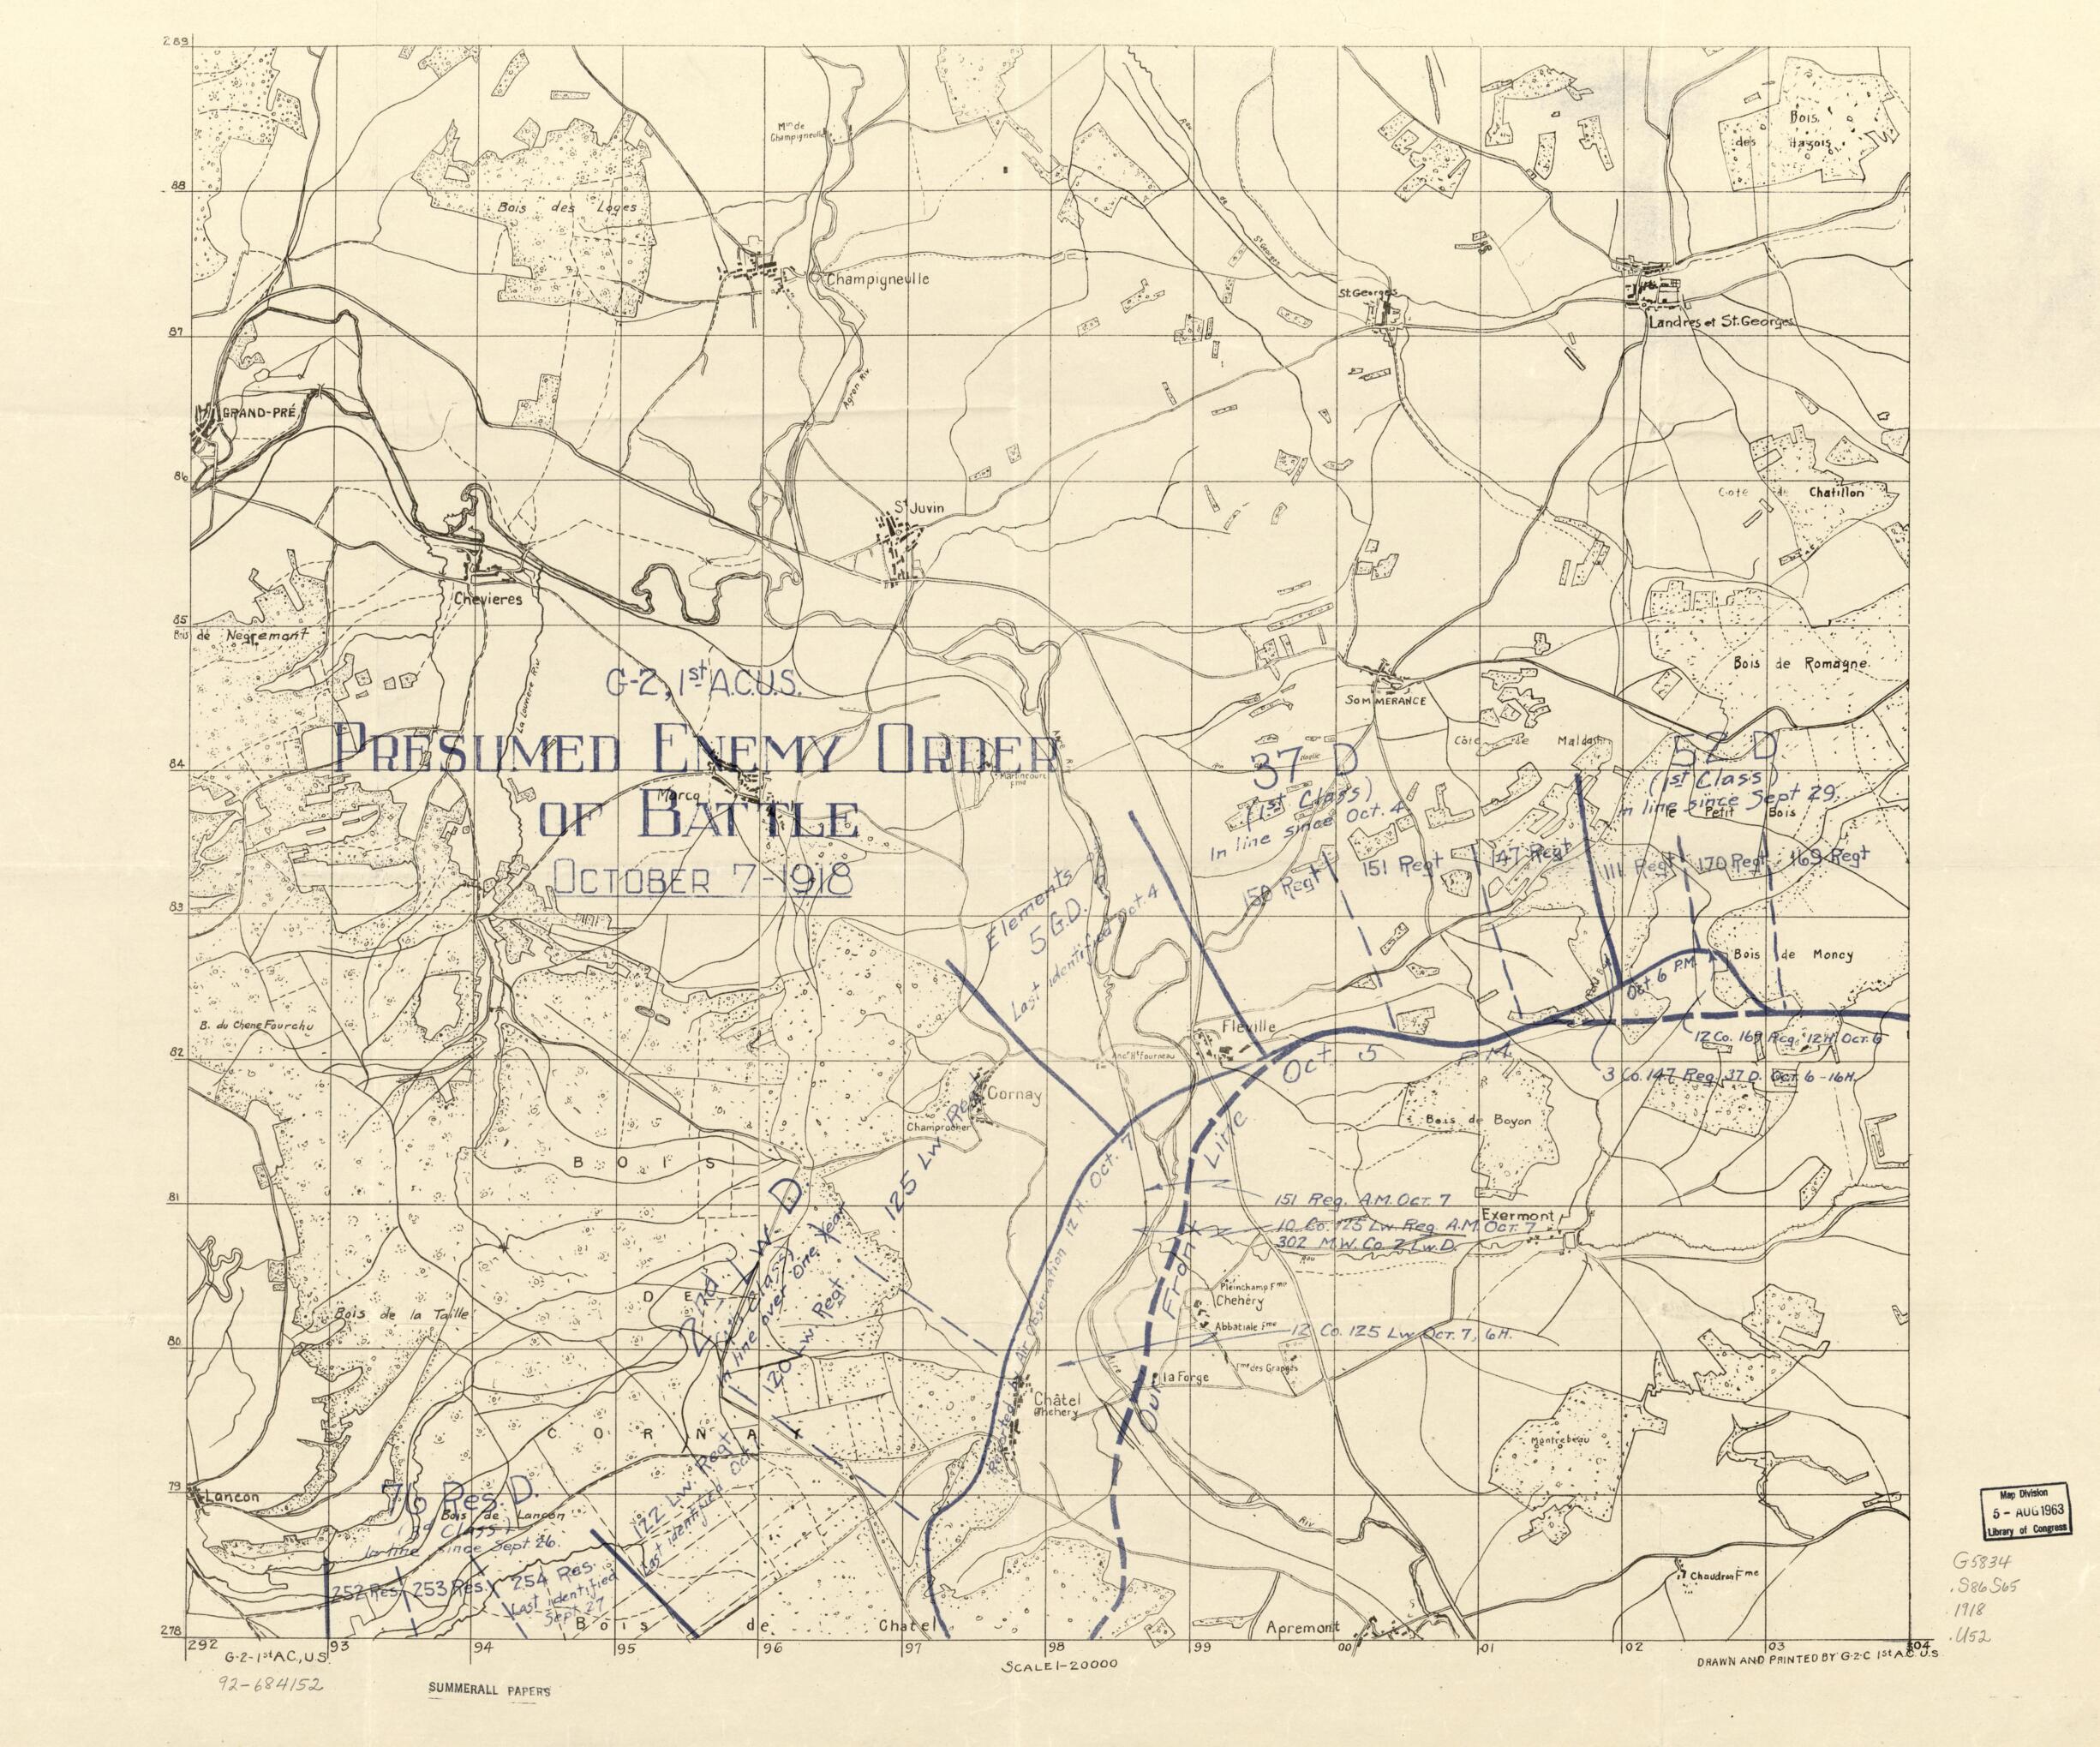 This old map of Presumed Enemy Order of Battle, October 7, from 1918 : Sommerance Region was created by Charles Pelot Summerall, 1st. G.S. Second Section United States. Army. Army Corps in 1918